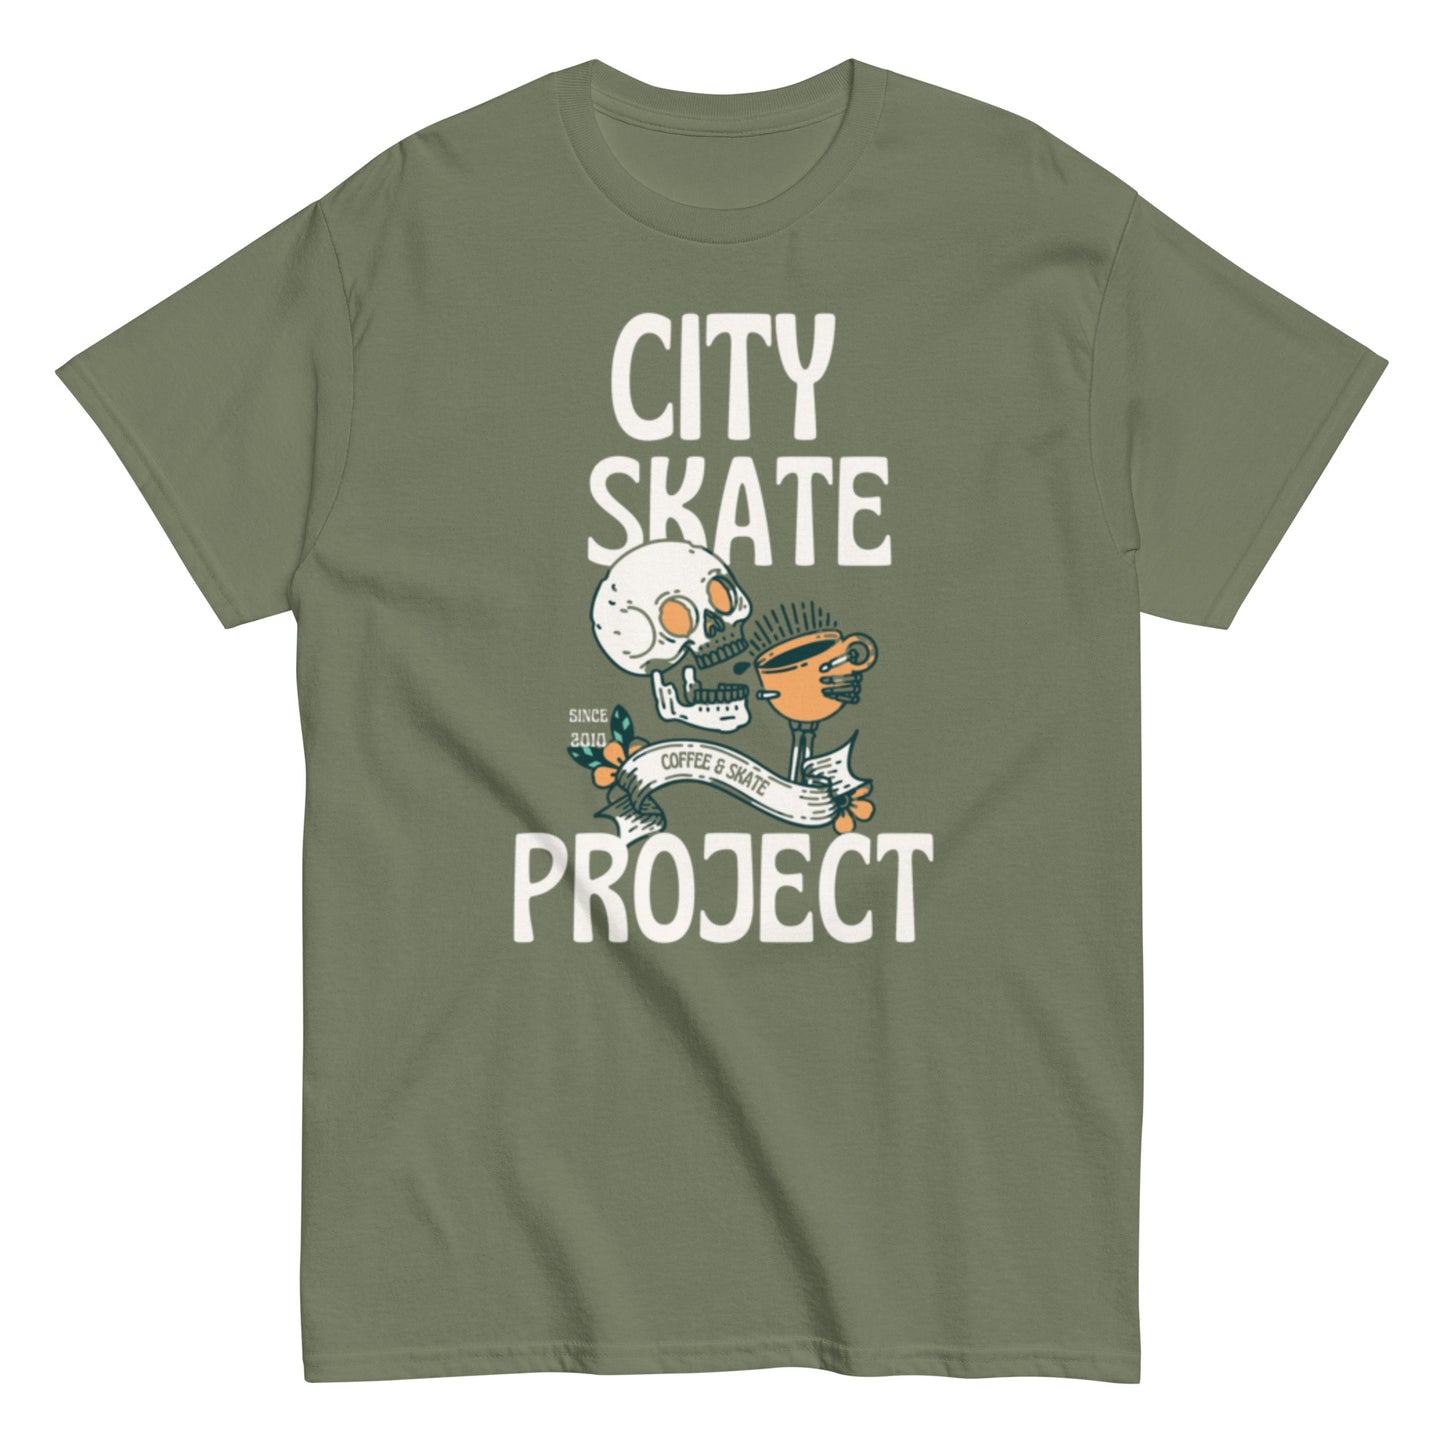 City Skate Project Coffee and Skate Session Men's classic tee